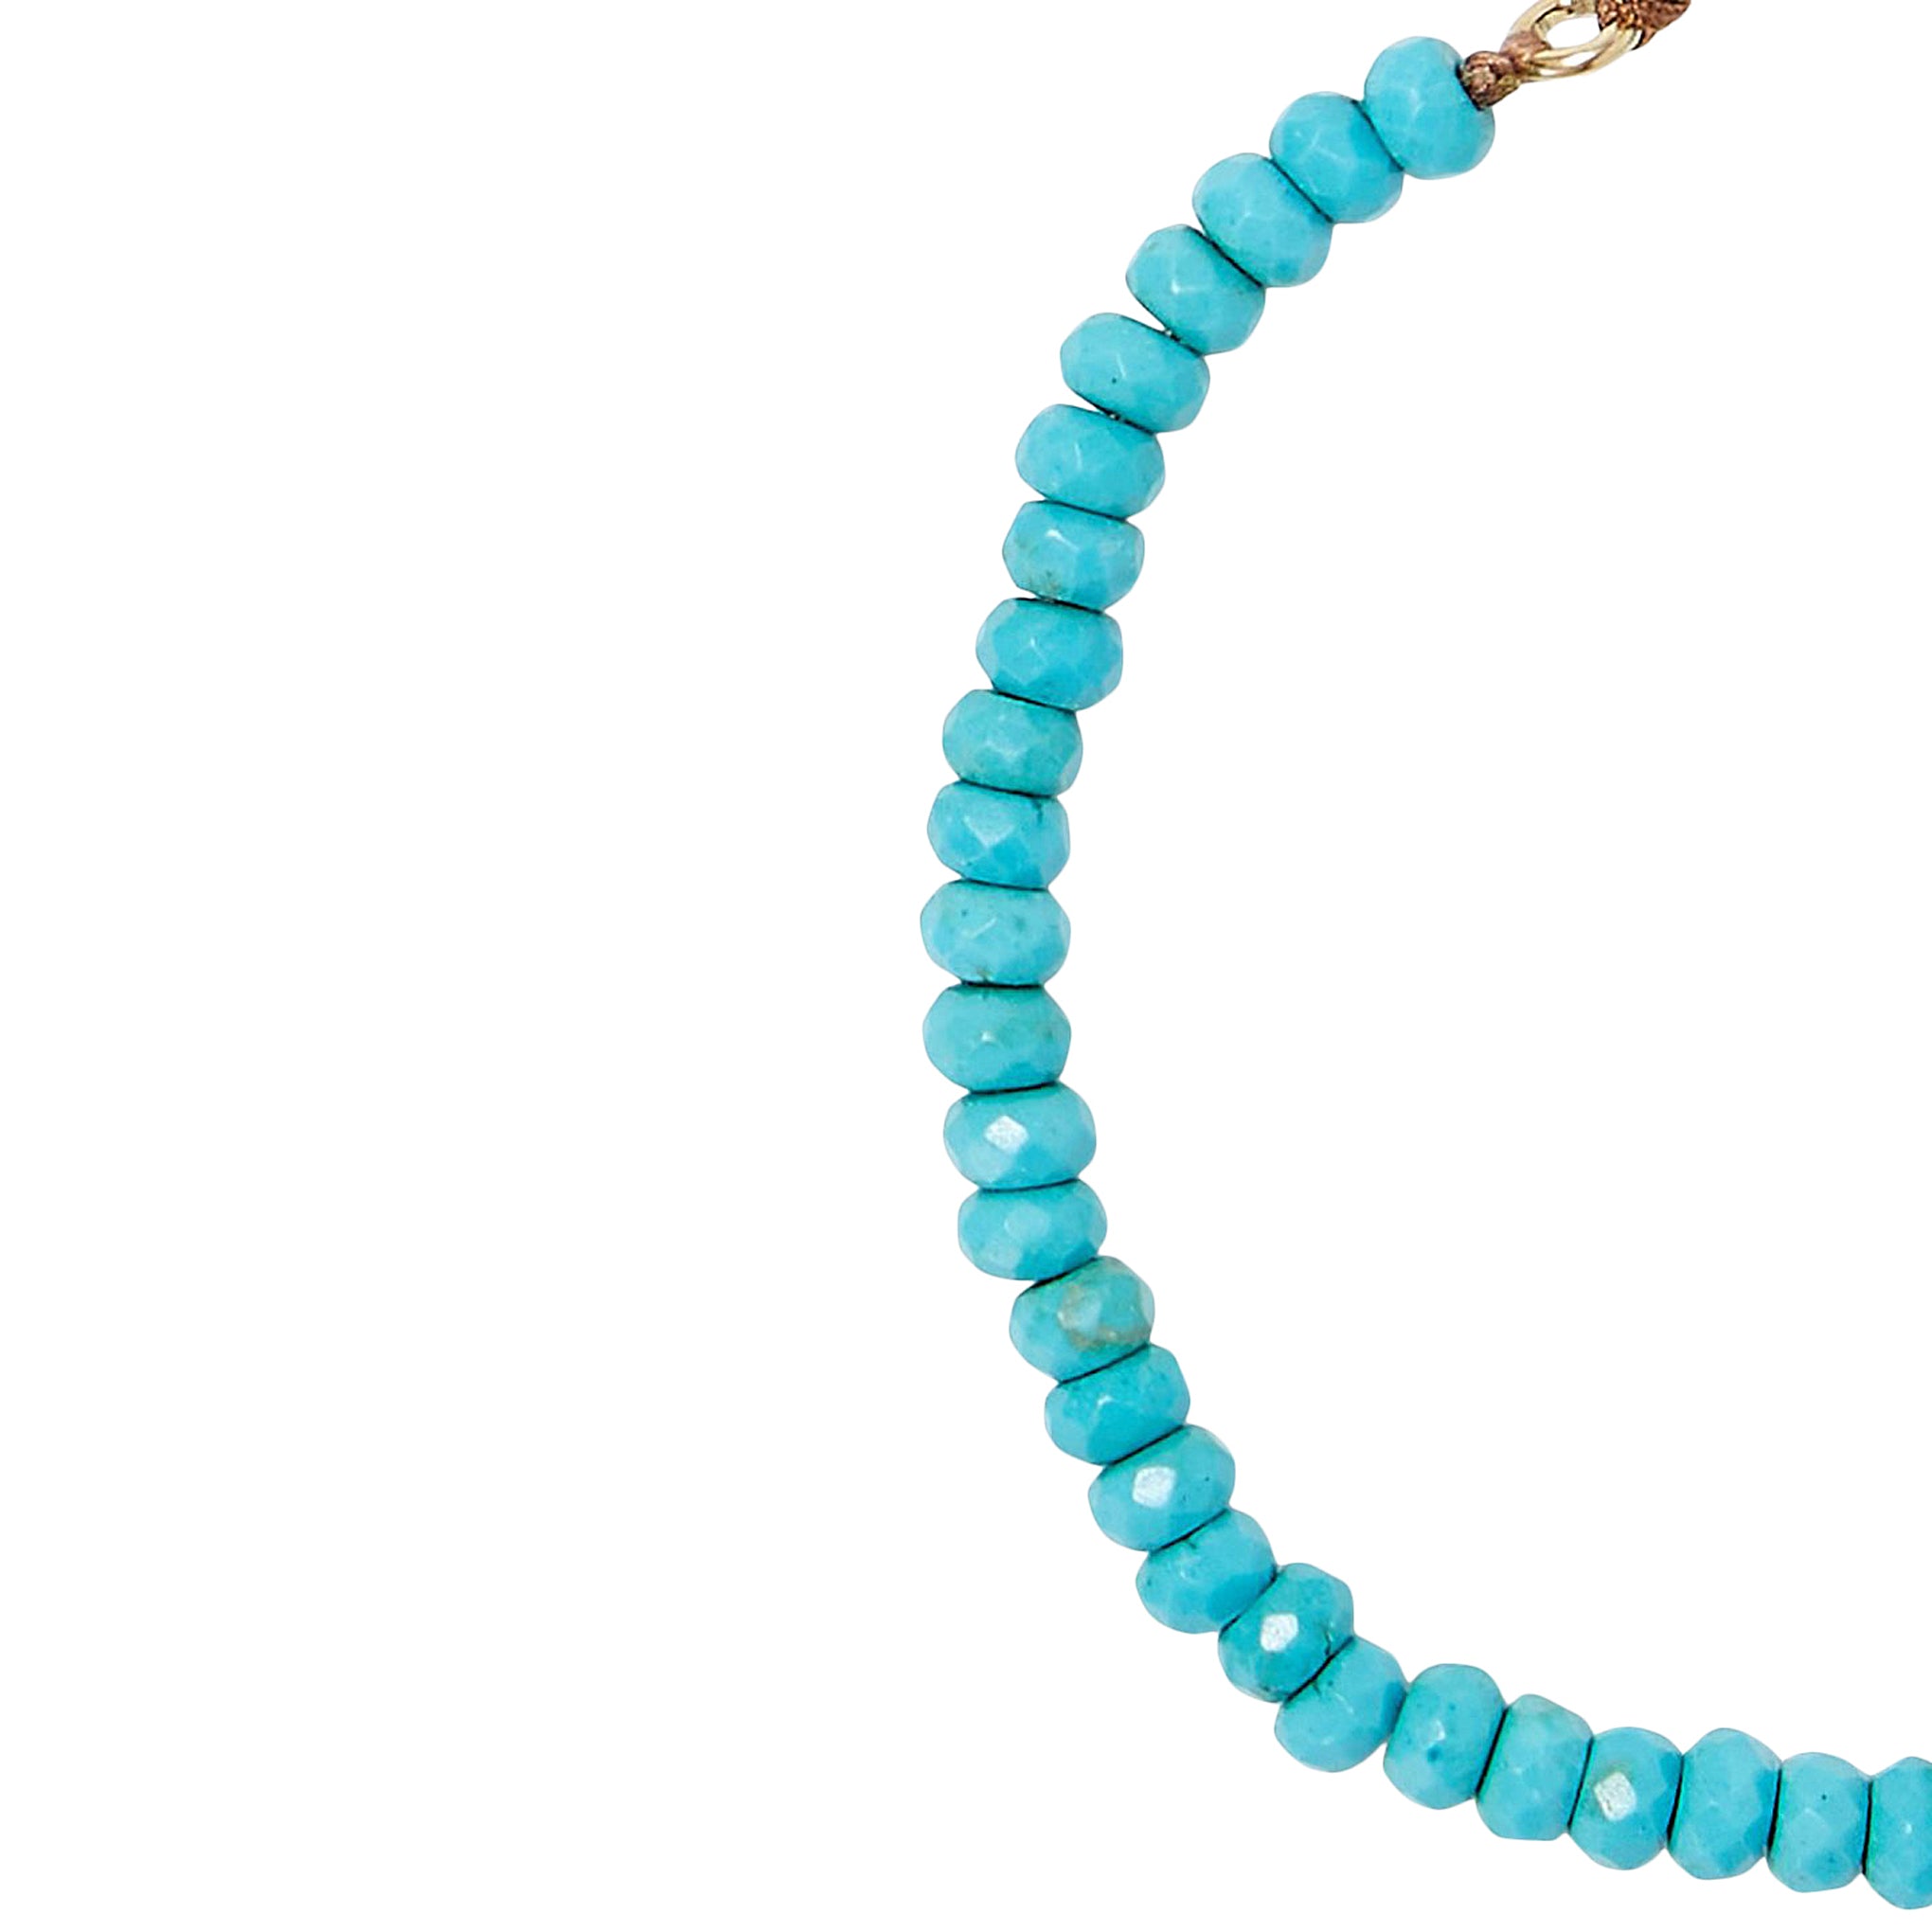 Chan Luu Single Wrap Beaded Bracelet in Turquoise and Gold Vermeil